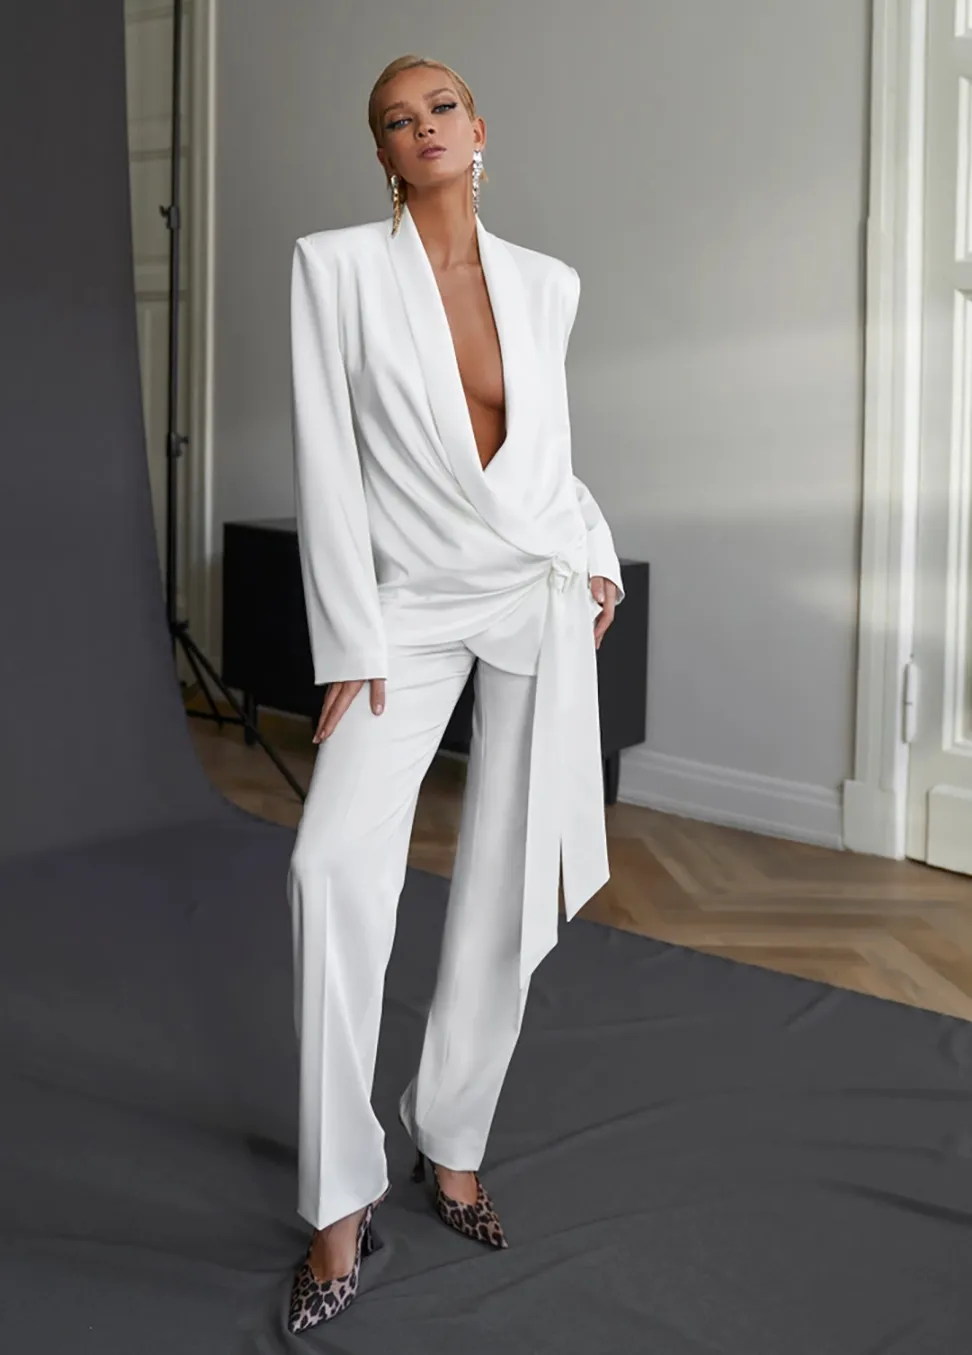 Soft White Pleated Pants Suit For Women Custom Made For Evening